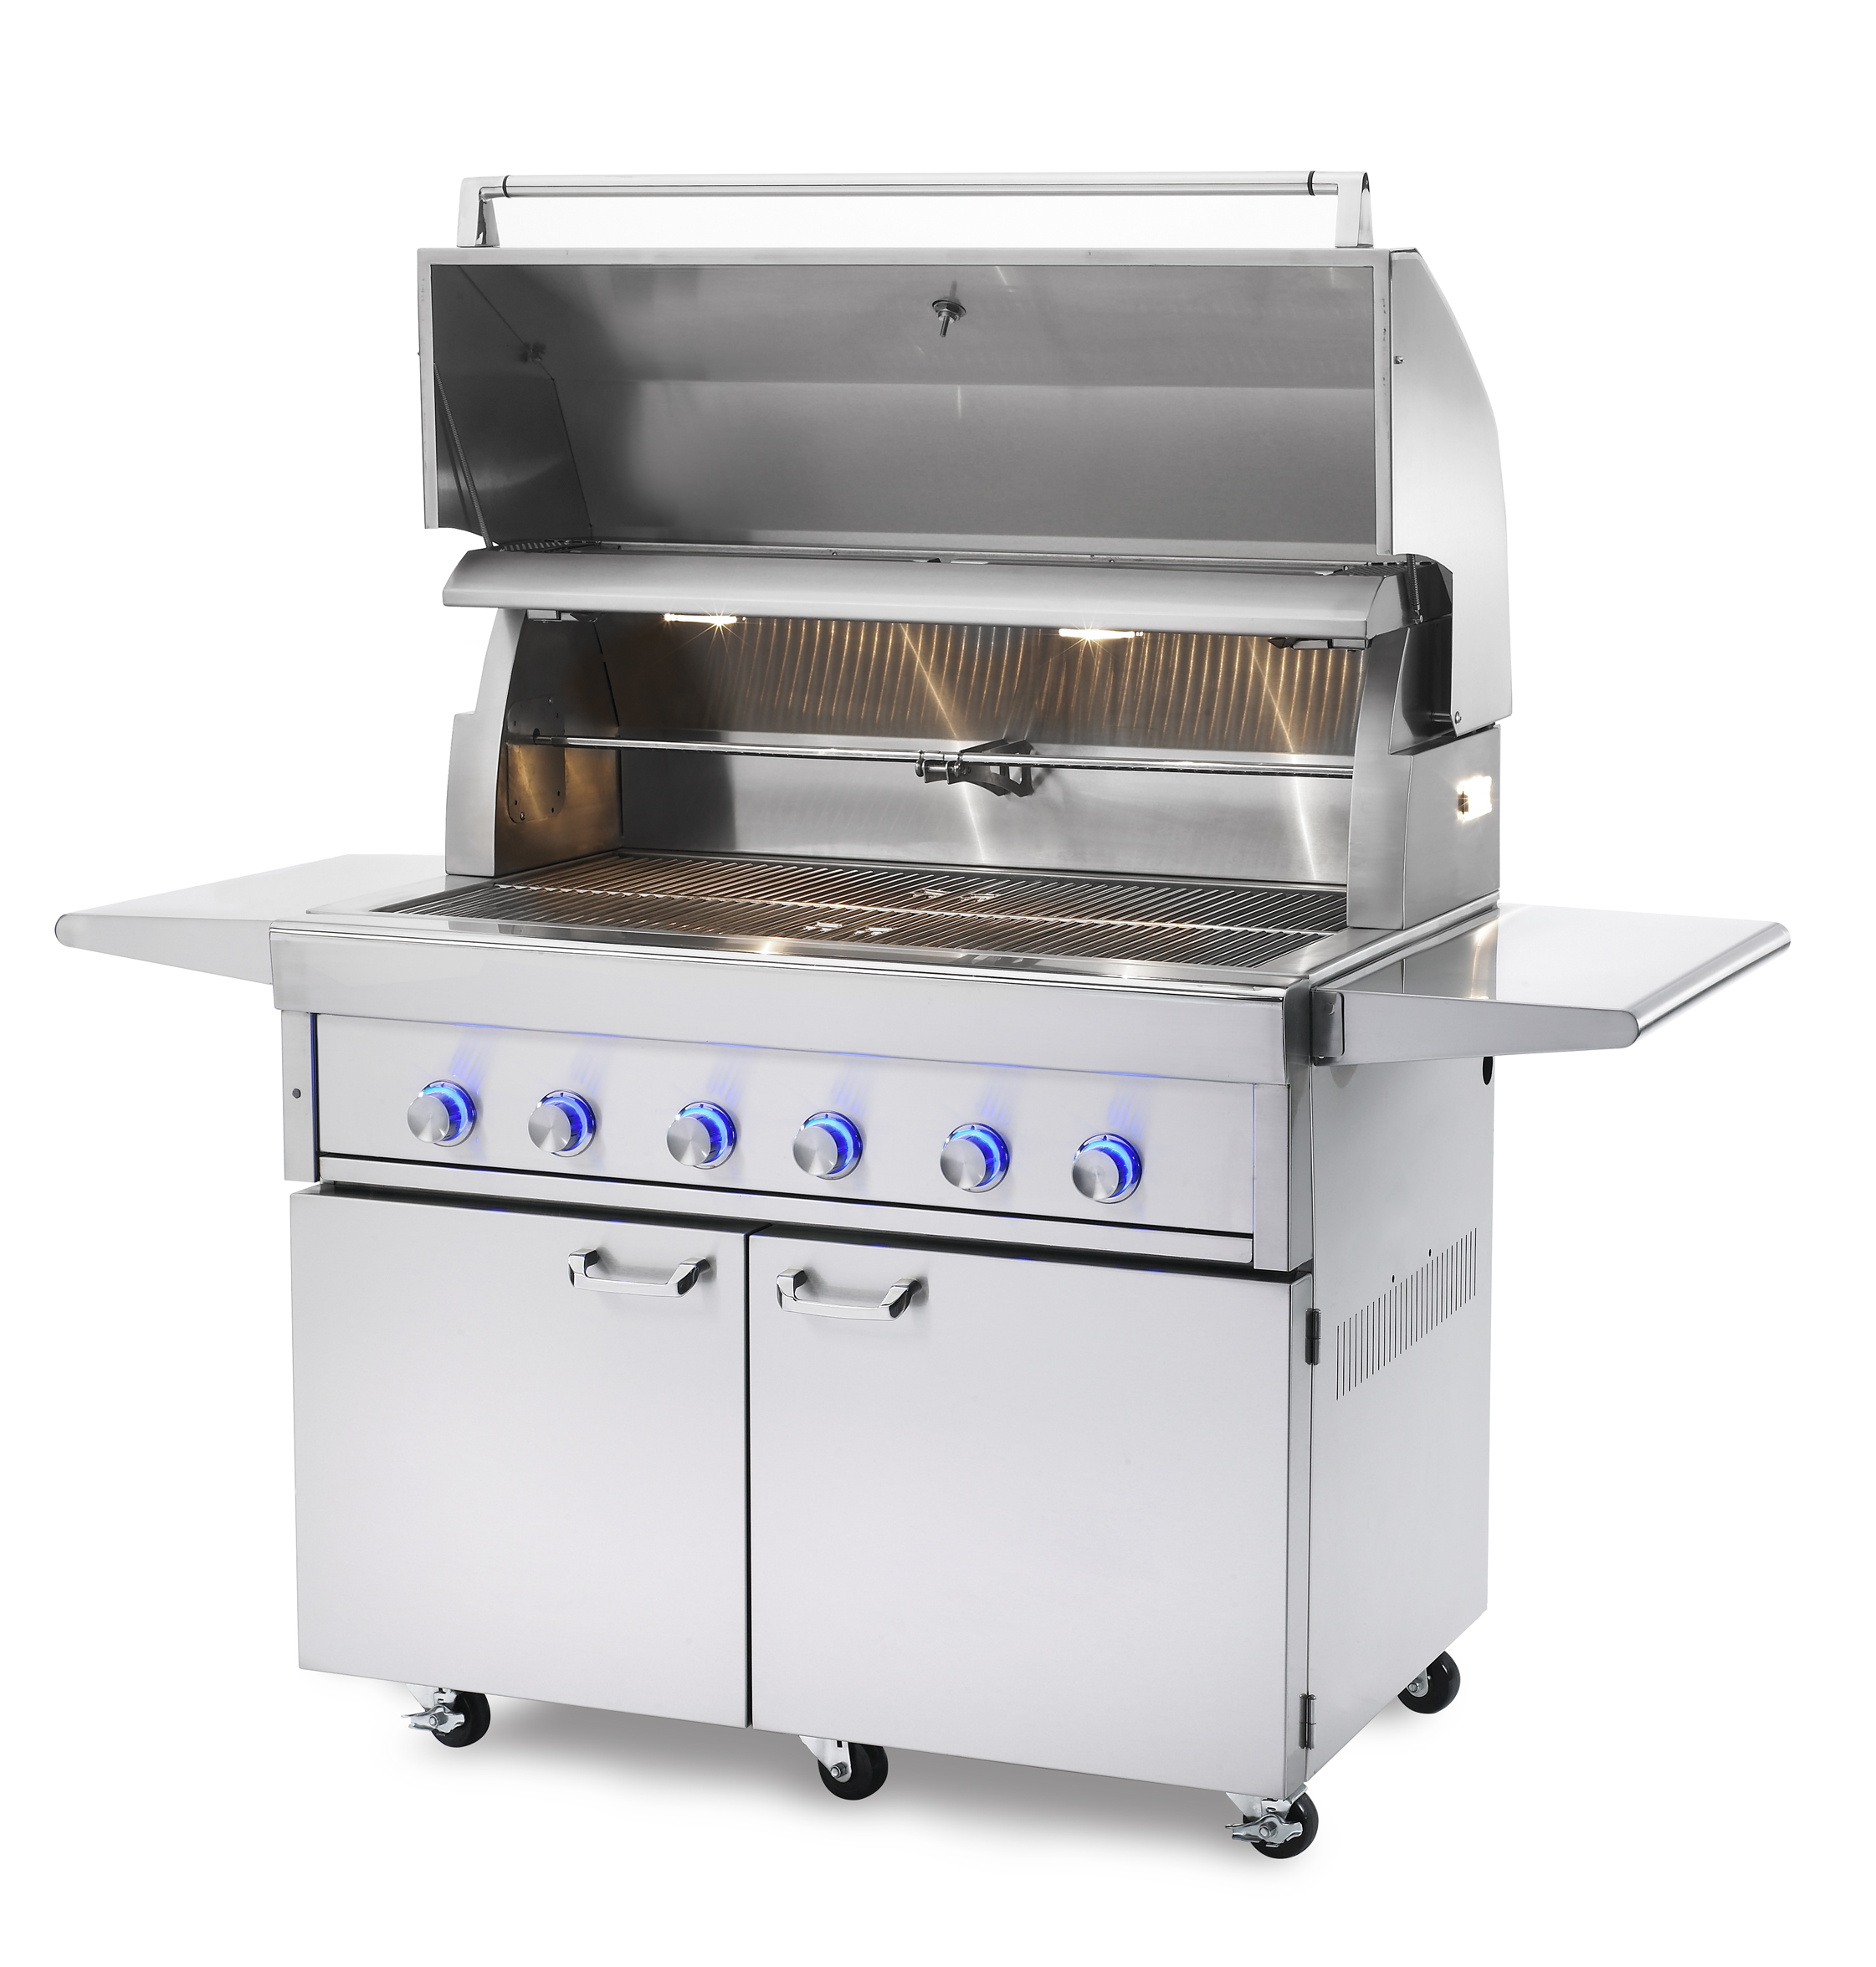 Lynx Brings Gas Grills into the Modern Age with its Smart Grill Concept